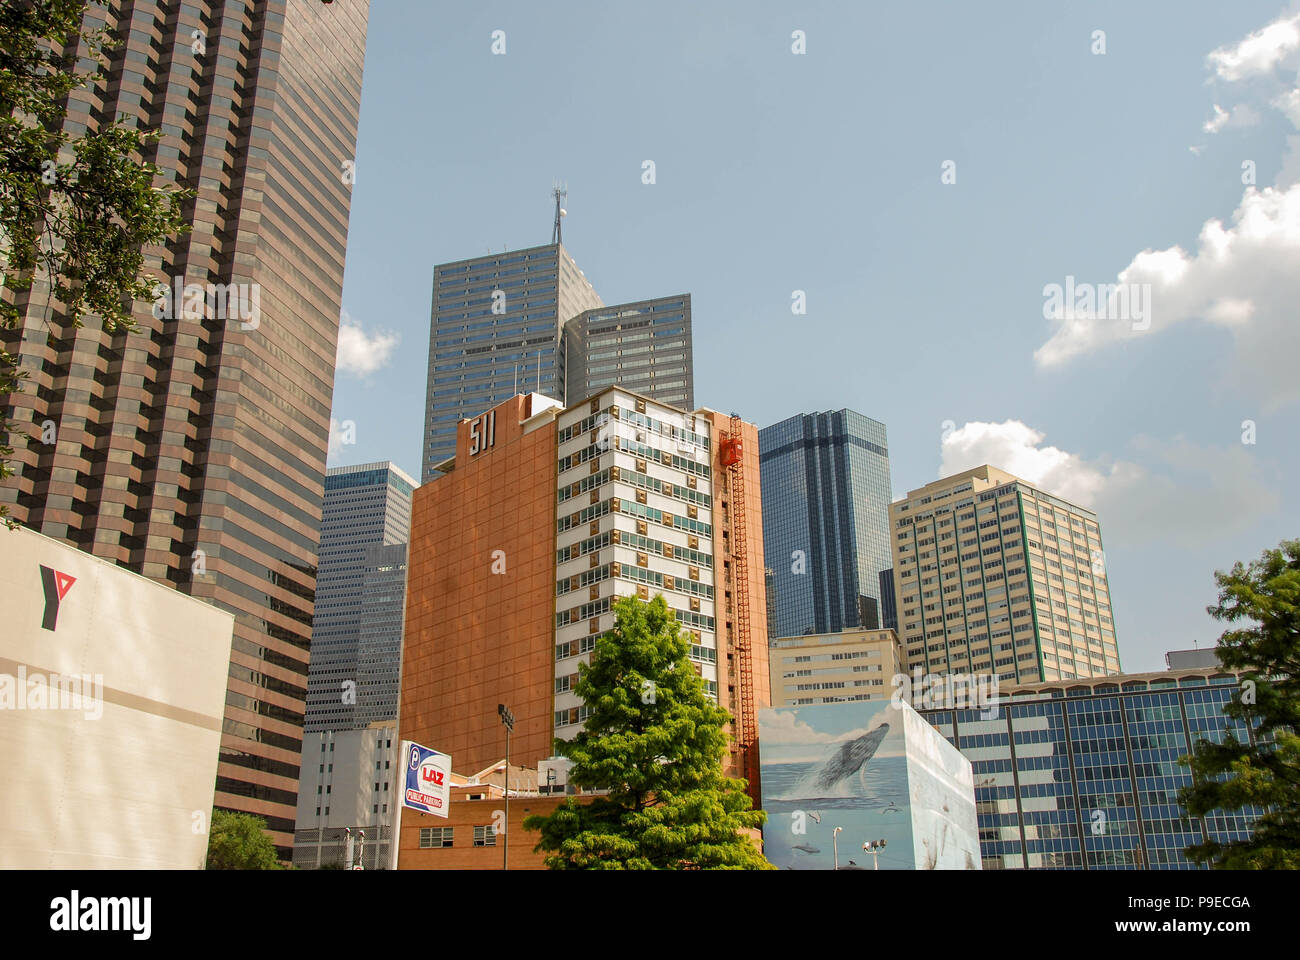 Landscape view of office buildings and skyscrapers on the skyline of downtown Dallas, Texas Stock Photo